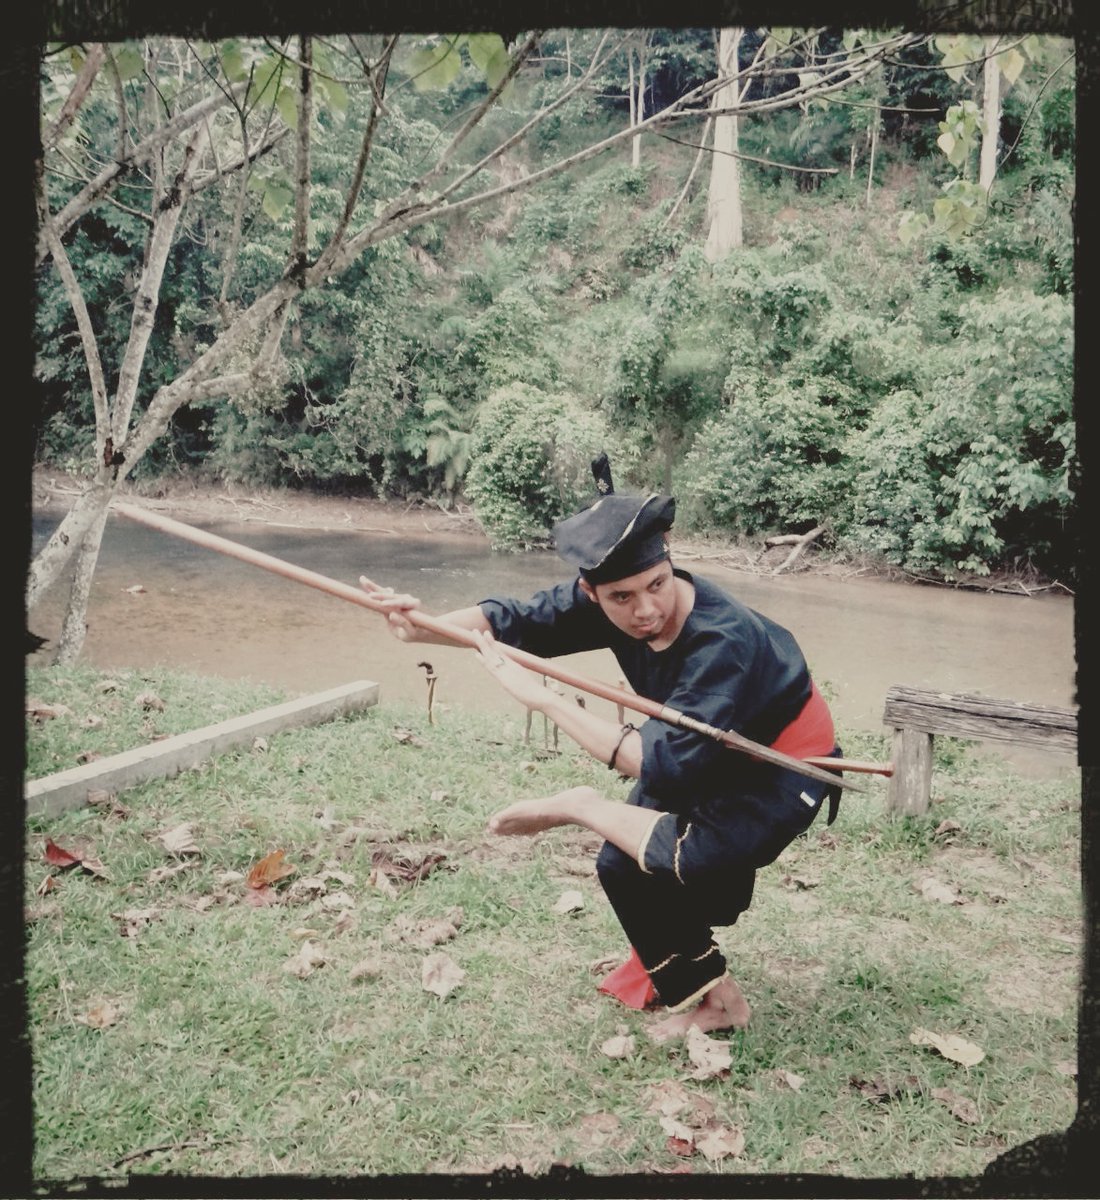 But the usual weapons associated with silat is always Keris, Sundang, Pedang Melayu, Parang / Golok, Kerambit. There's an old saying; "Whatever in a hand or grasp of a Malay warrior, it became weapon". This indicate how dangerous a person can be if he mastered the art.(20)